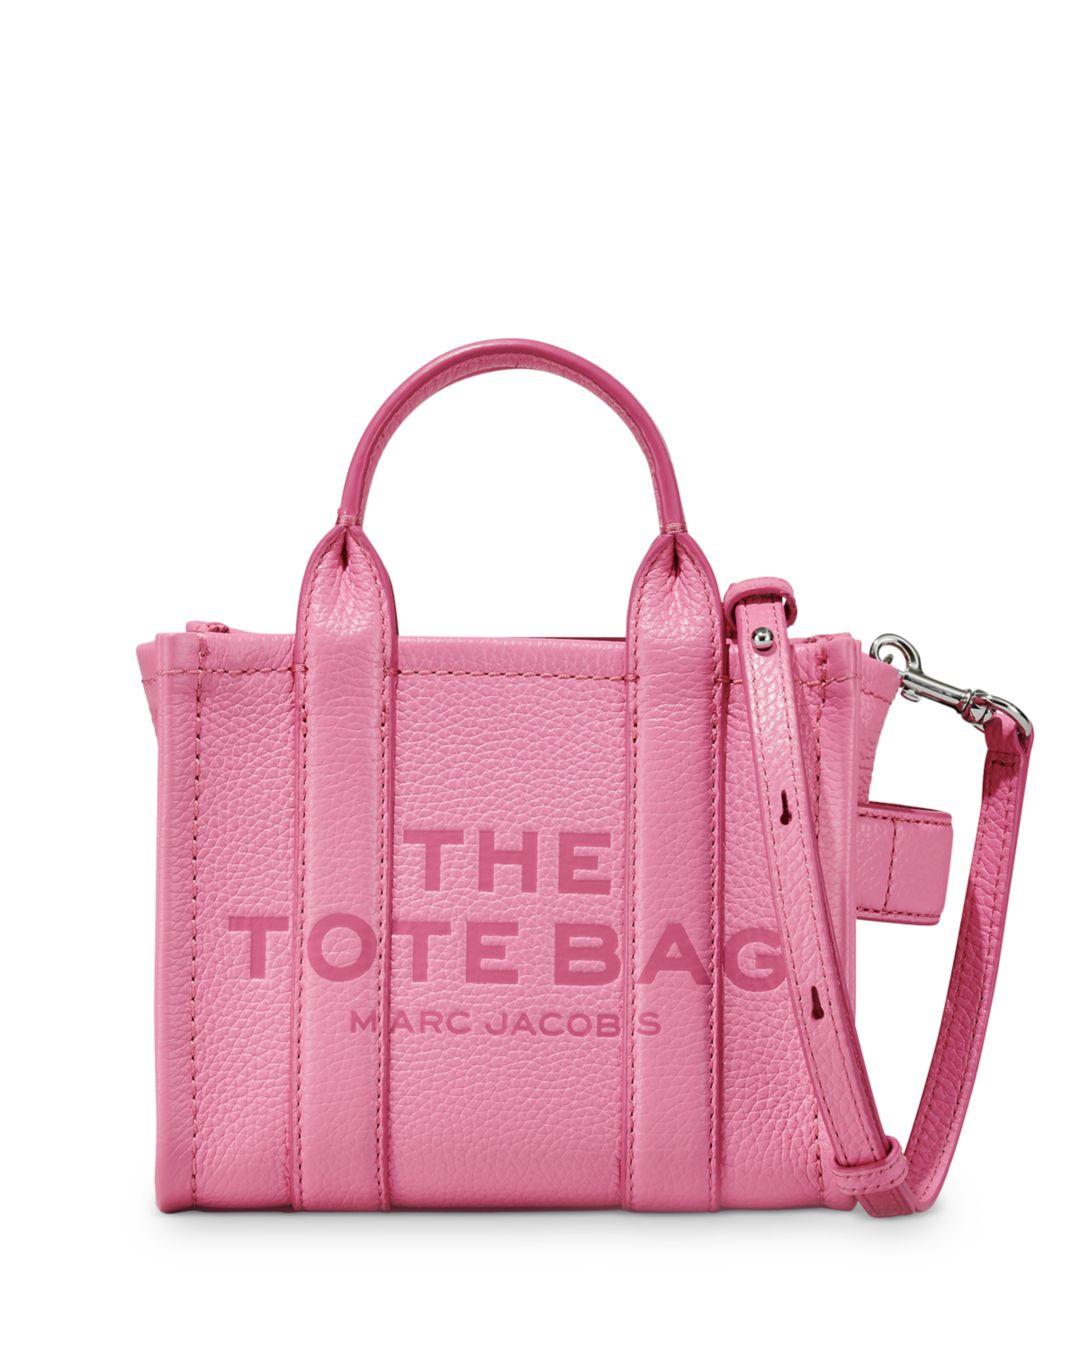 Marc Jacobs The Leather Micro Tote Bag in Pink | Lyst